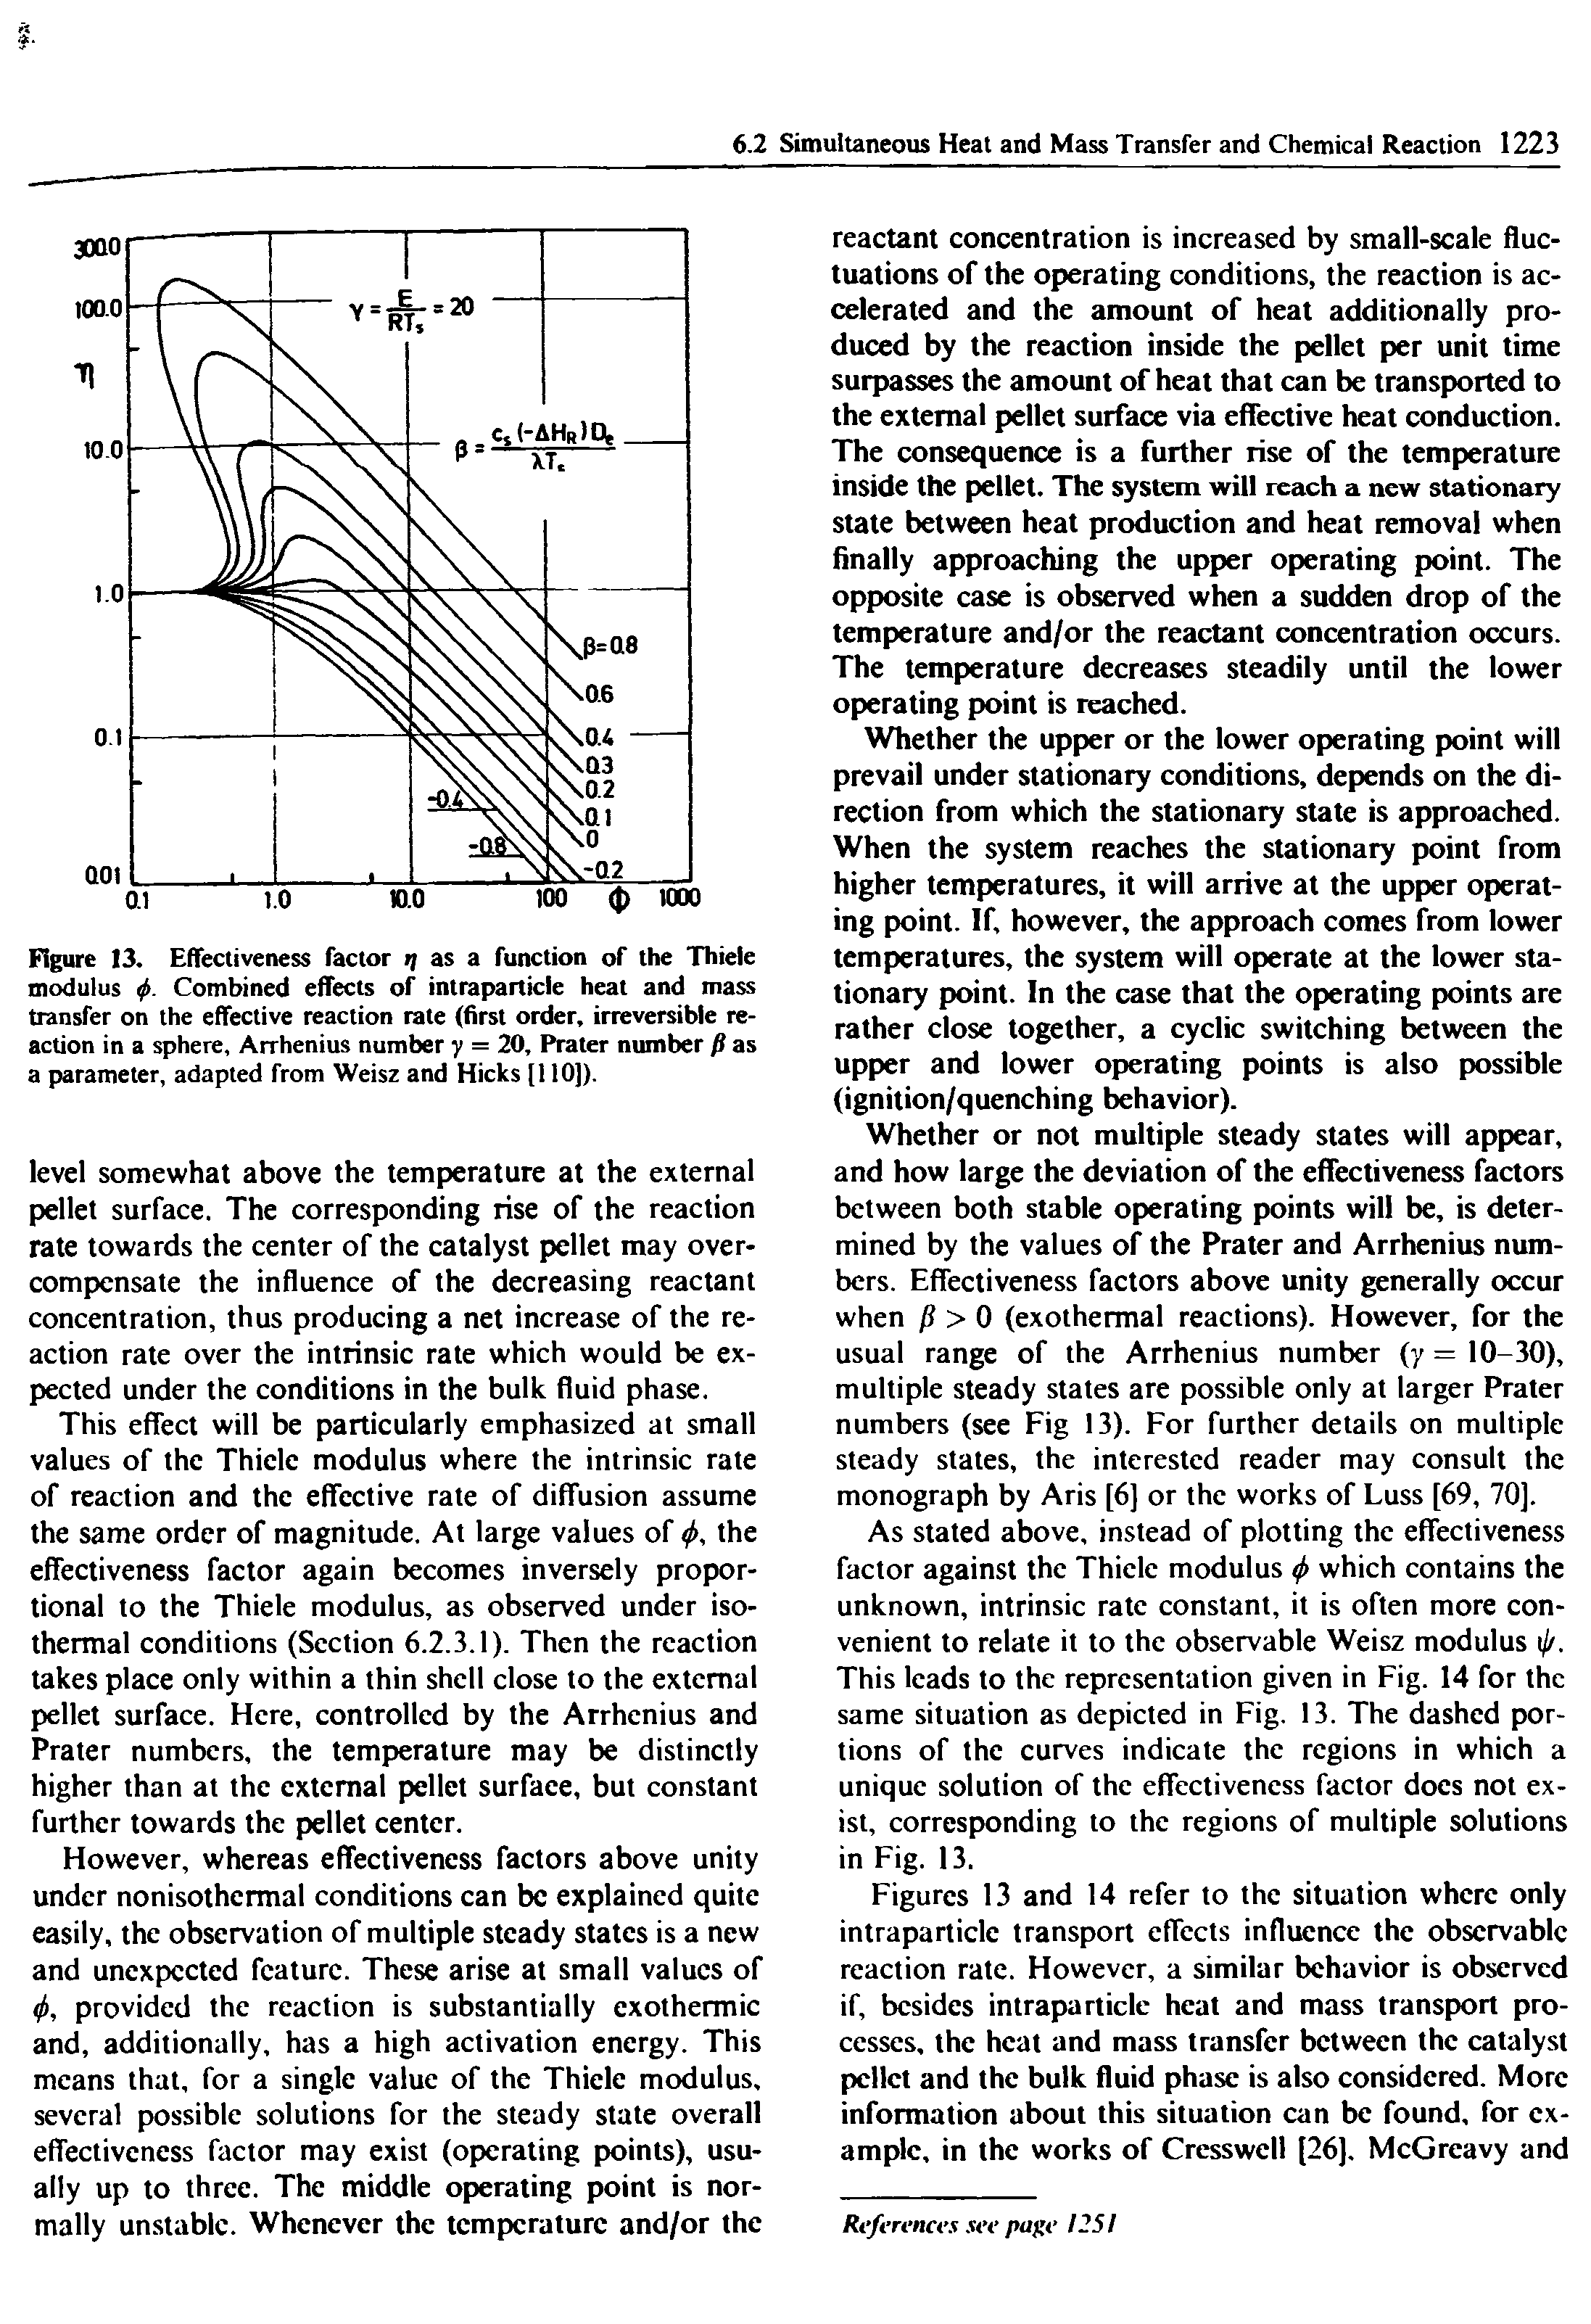 Figure 13. Effectiveness factor i) as a function of the Thiele modulus <f>. Combined effects of intraparticle heat and mass transfer on the effective reaction rate (first order, irreversible reaction in a sphere, Arrhenius number y = 20, Prater number fi as a parameter, adapted from Weisz and Hicks [110]).